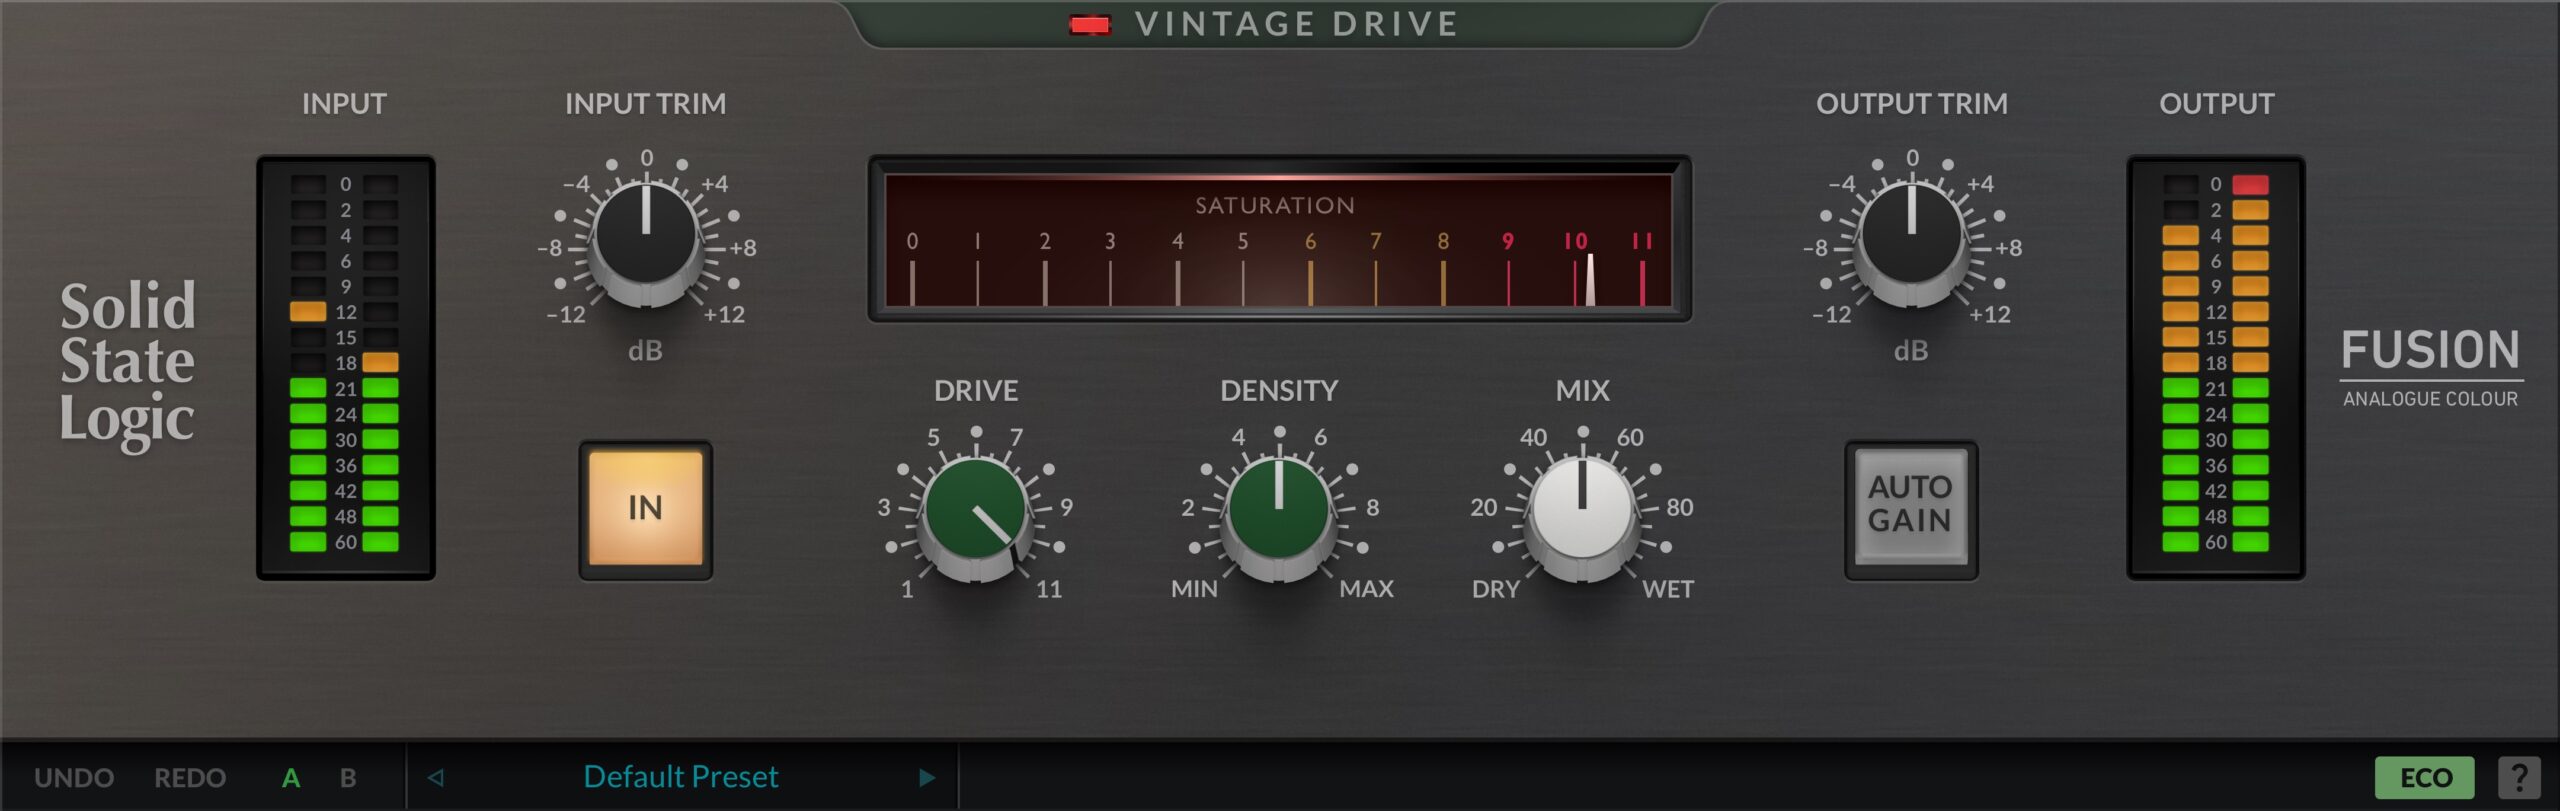 Solid State Logic Fusion Vintage Drive